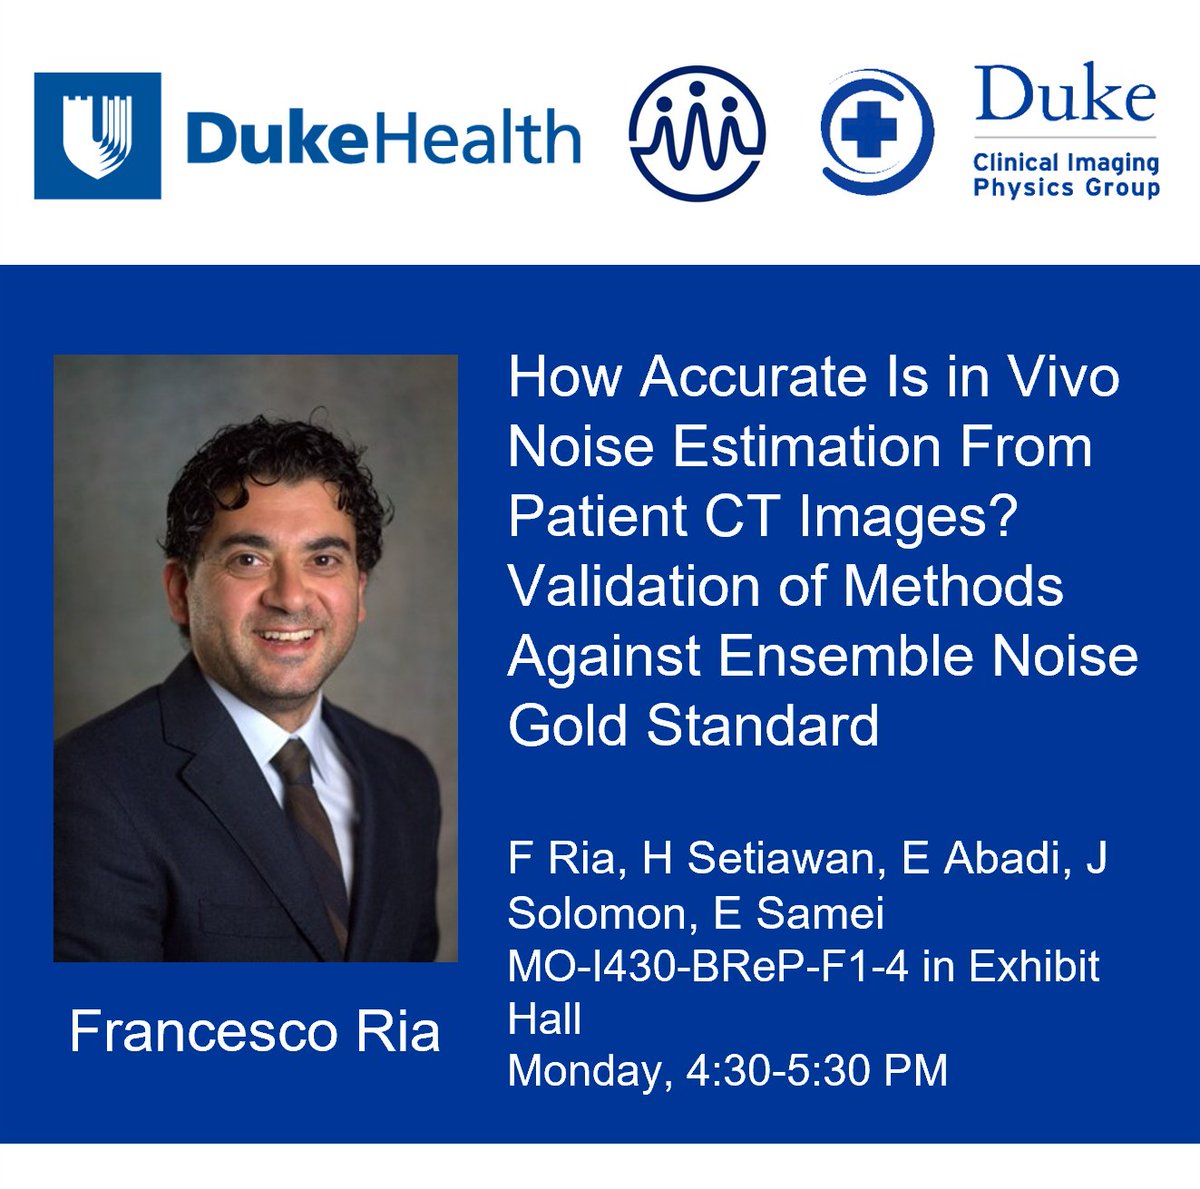 Visit @ria_francesco poster in the Exhibit Hall on 'How Accurate Is in Vivo Noise Estimation From Patient CT Images? Validation of Methods Against Ensemble Noise Gold Standard' @HananielS @ehsanabadi1 @jsolomojo @EhsanSamei @DukeCVIT #VirtualImagingTrials #AAPM2022